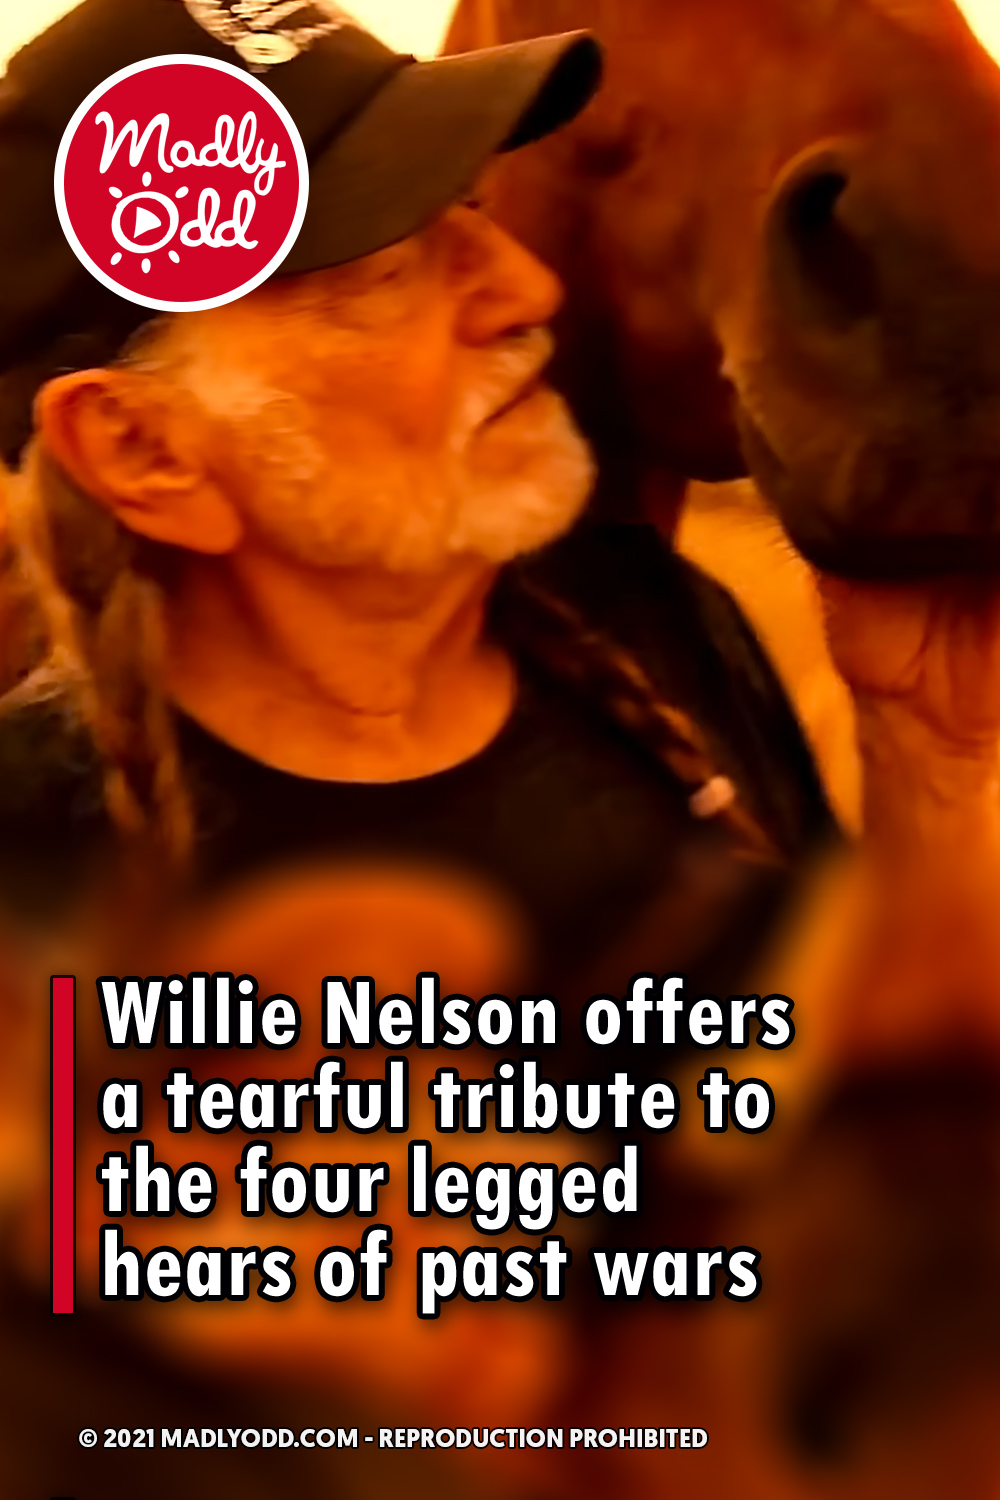 Willie Nelson offers a tearful tribute to the four legged hears of past wars